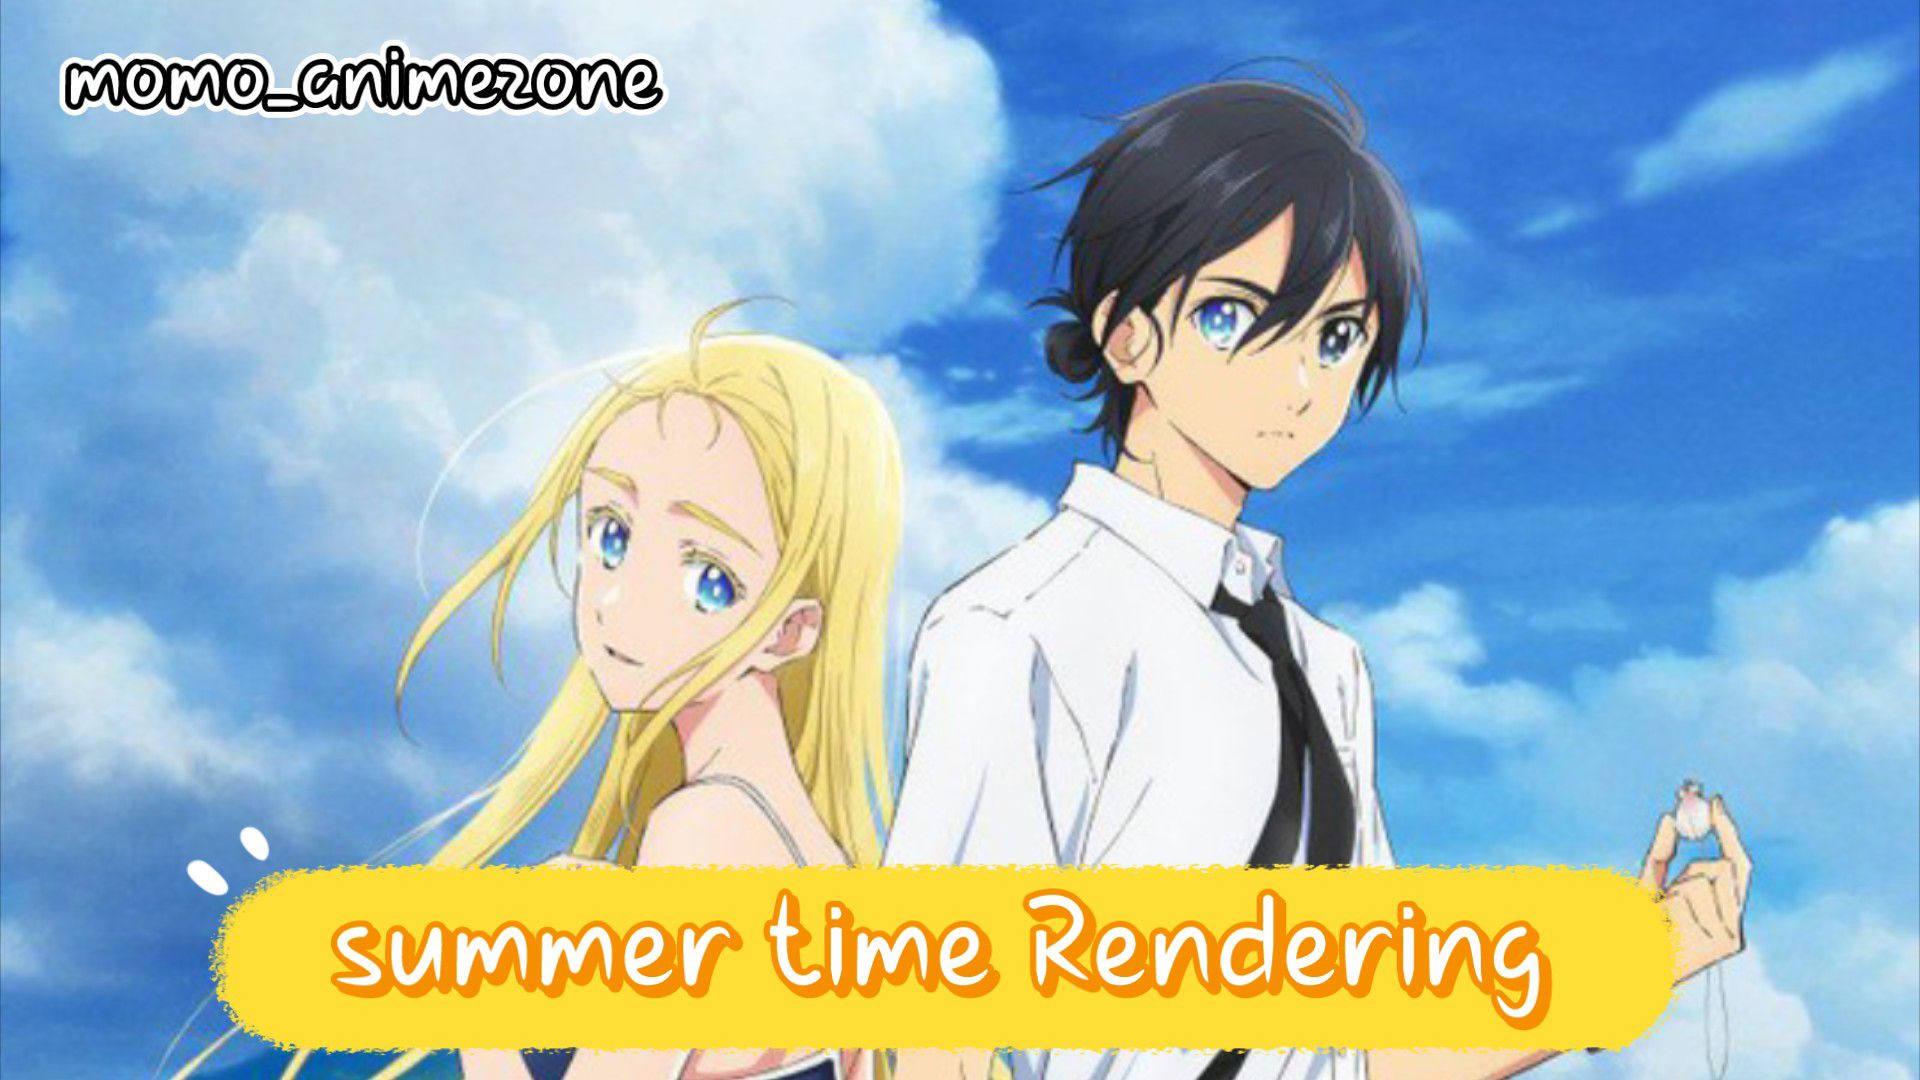 Summer Time Rendering Season 1 Episode 5 Release Date and Time